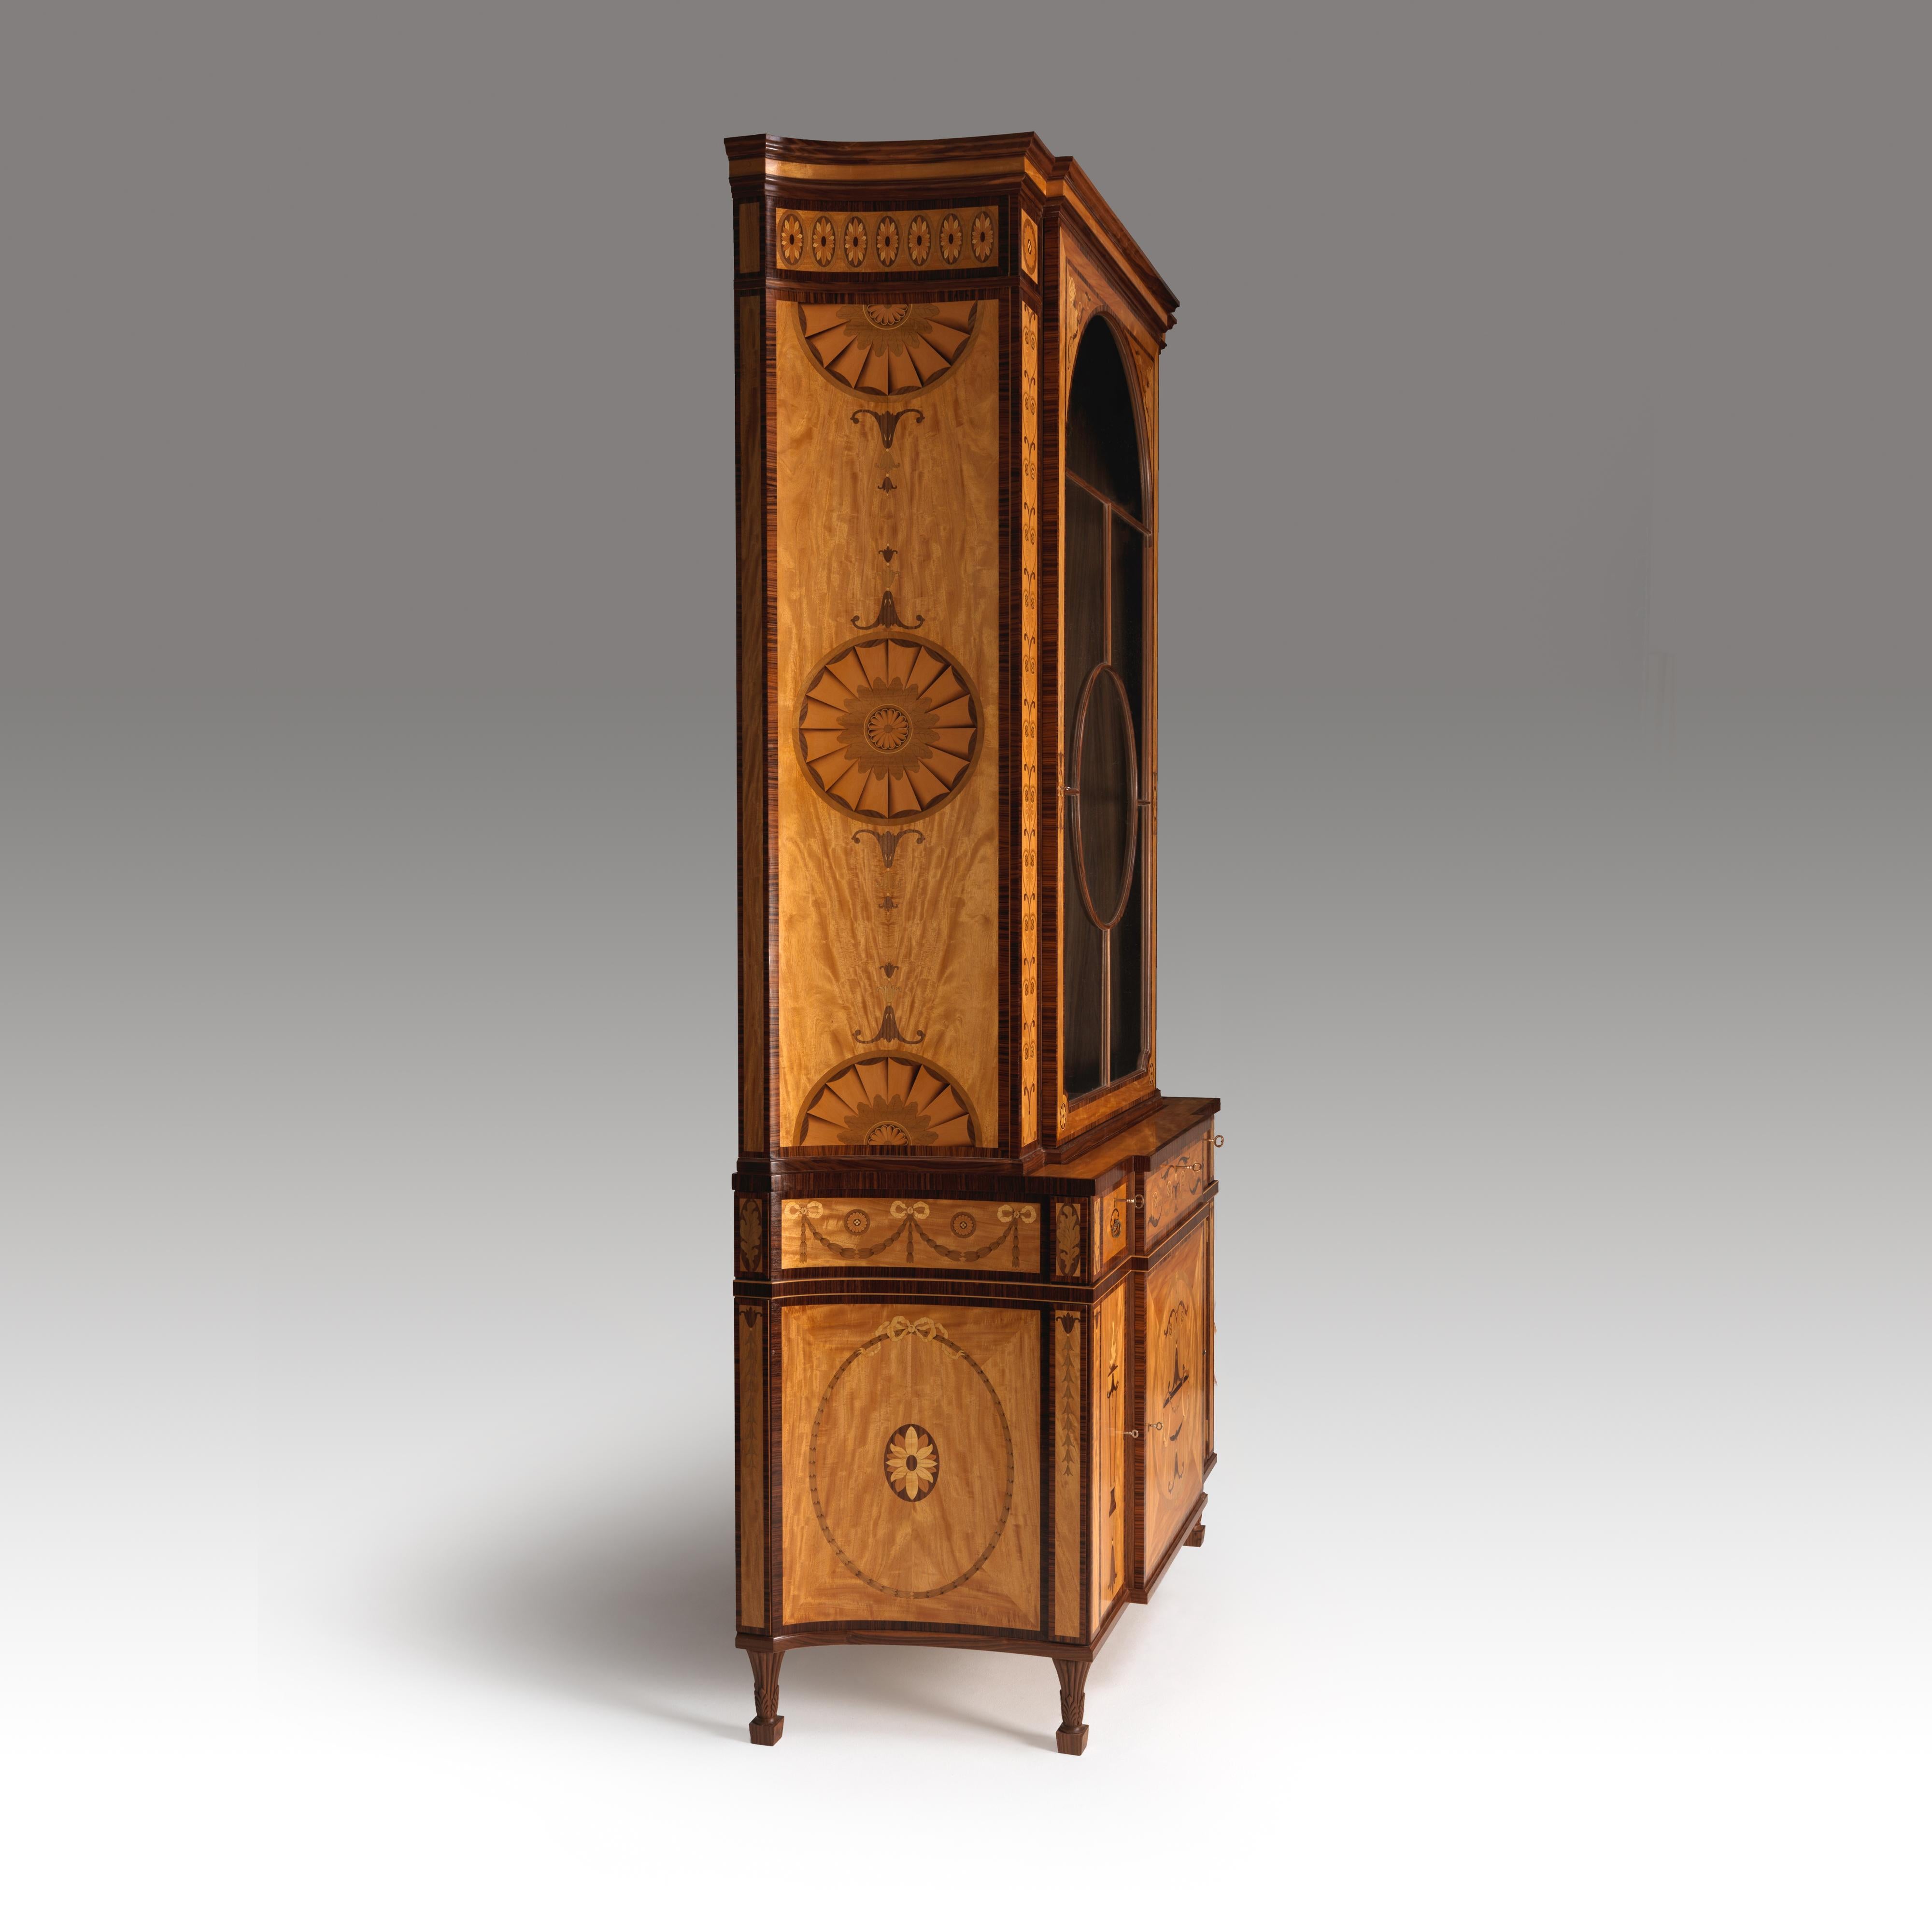 A fine Chippendale design marquetry inlaid satinwood pier cabinet. The base is designed as a cupboard with adjustable interior shelves. There is a central secret drawer, below the glazed top cabinet, with adjustable shelves. The drawers feature hand